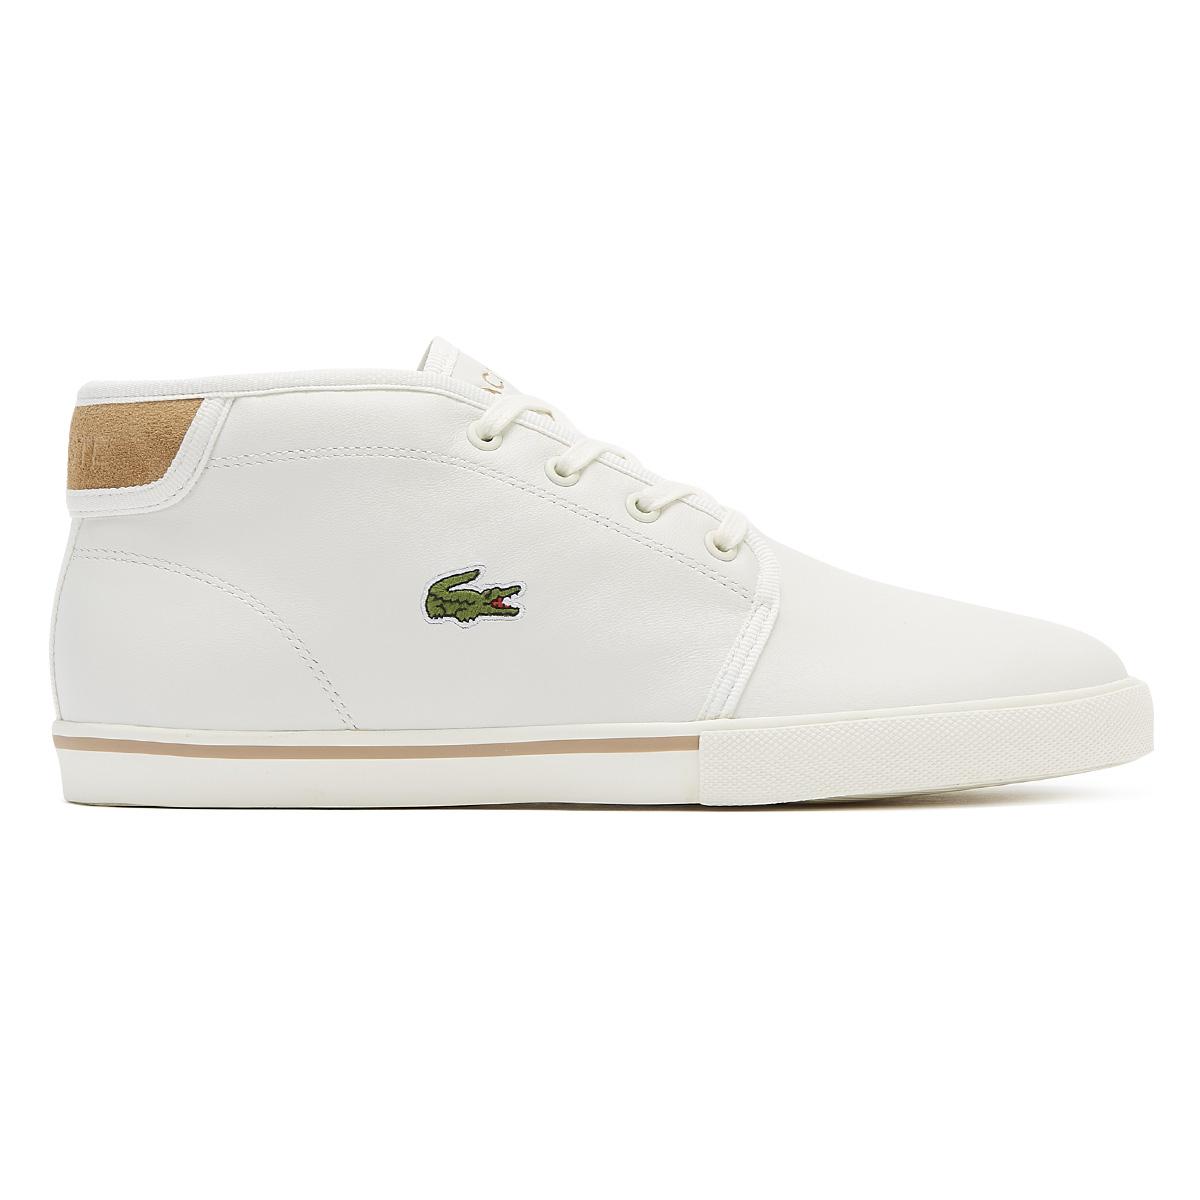 Lacoste Leather Ampthill 119 1 Cma Hi-top Trainers in White for Men - Lyst